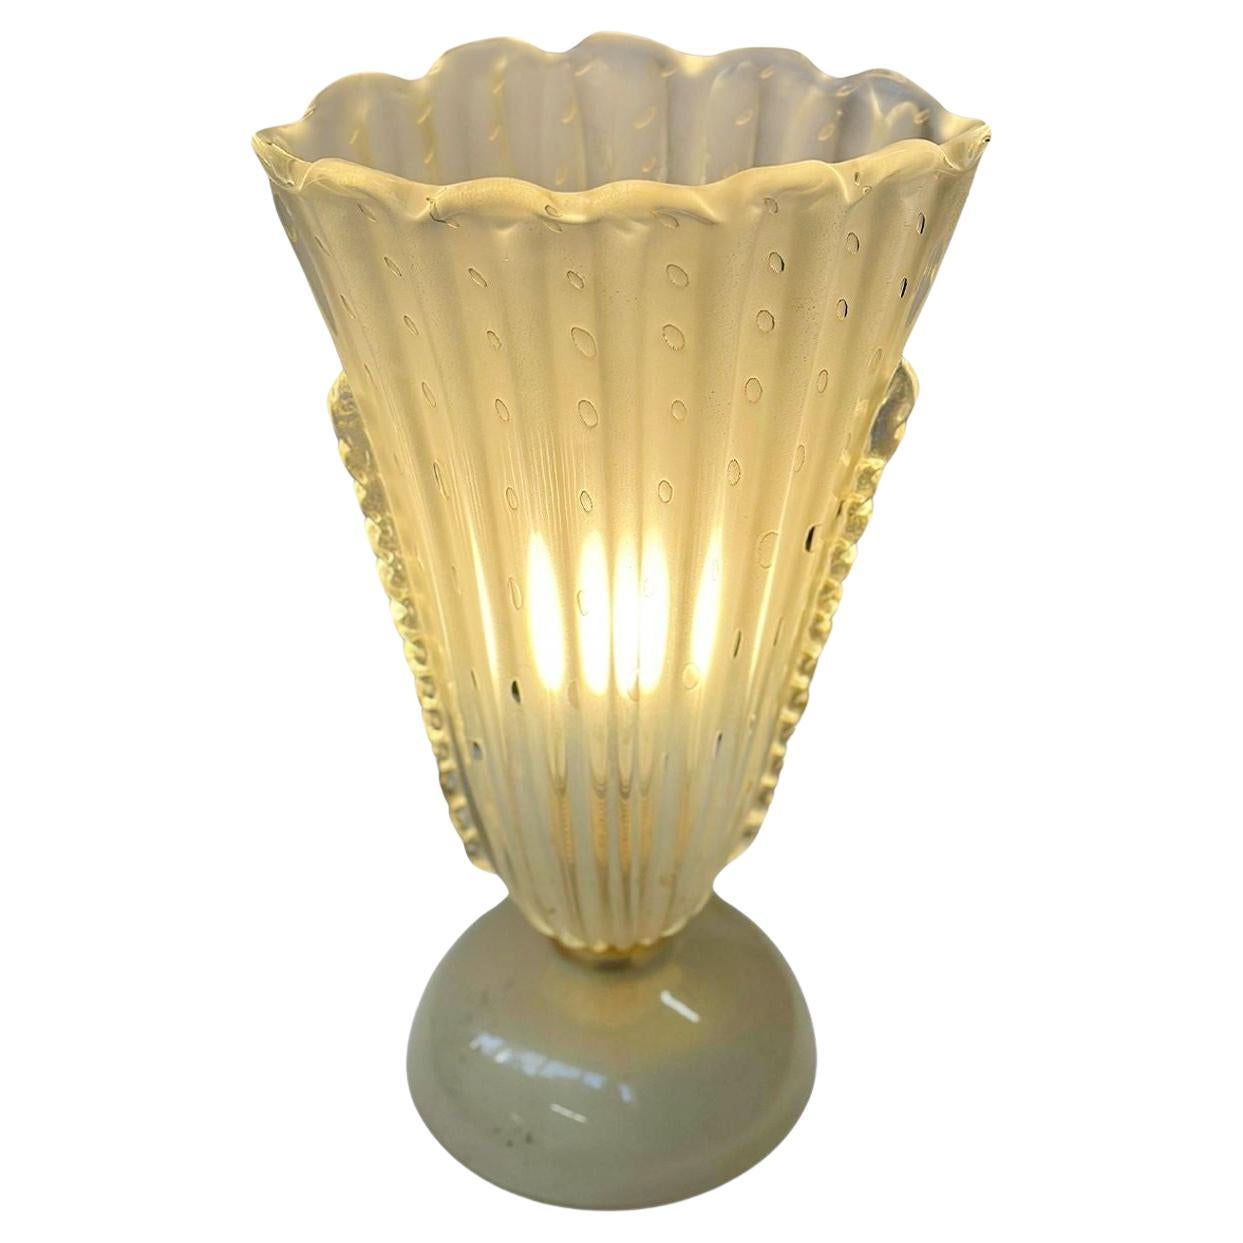 Vintage Italian Murano Table Lamp with Gold Flecks, c. 1970's For Sale